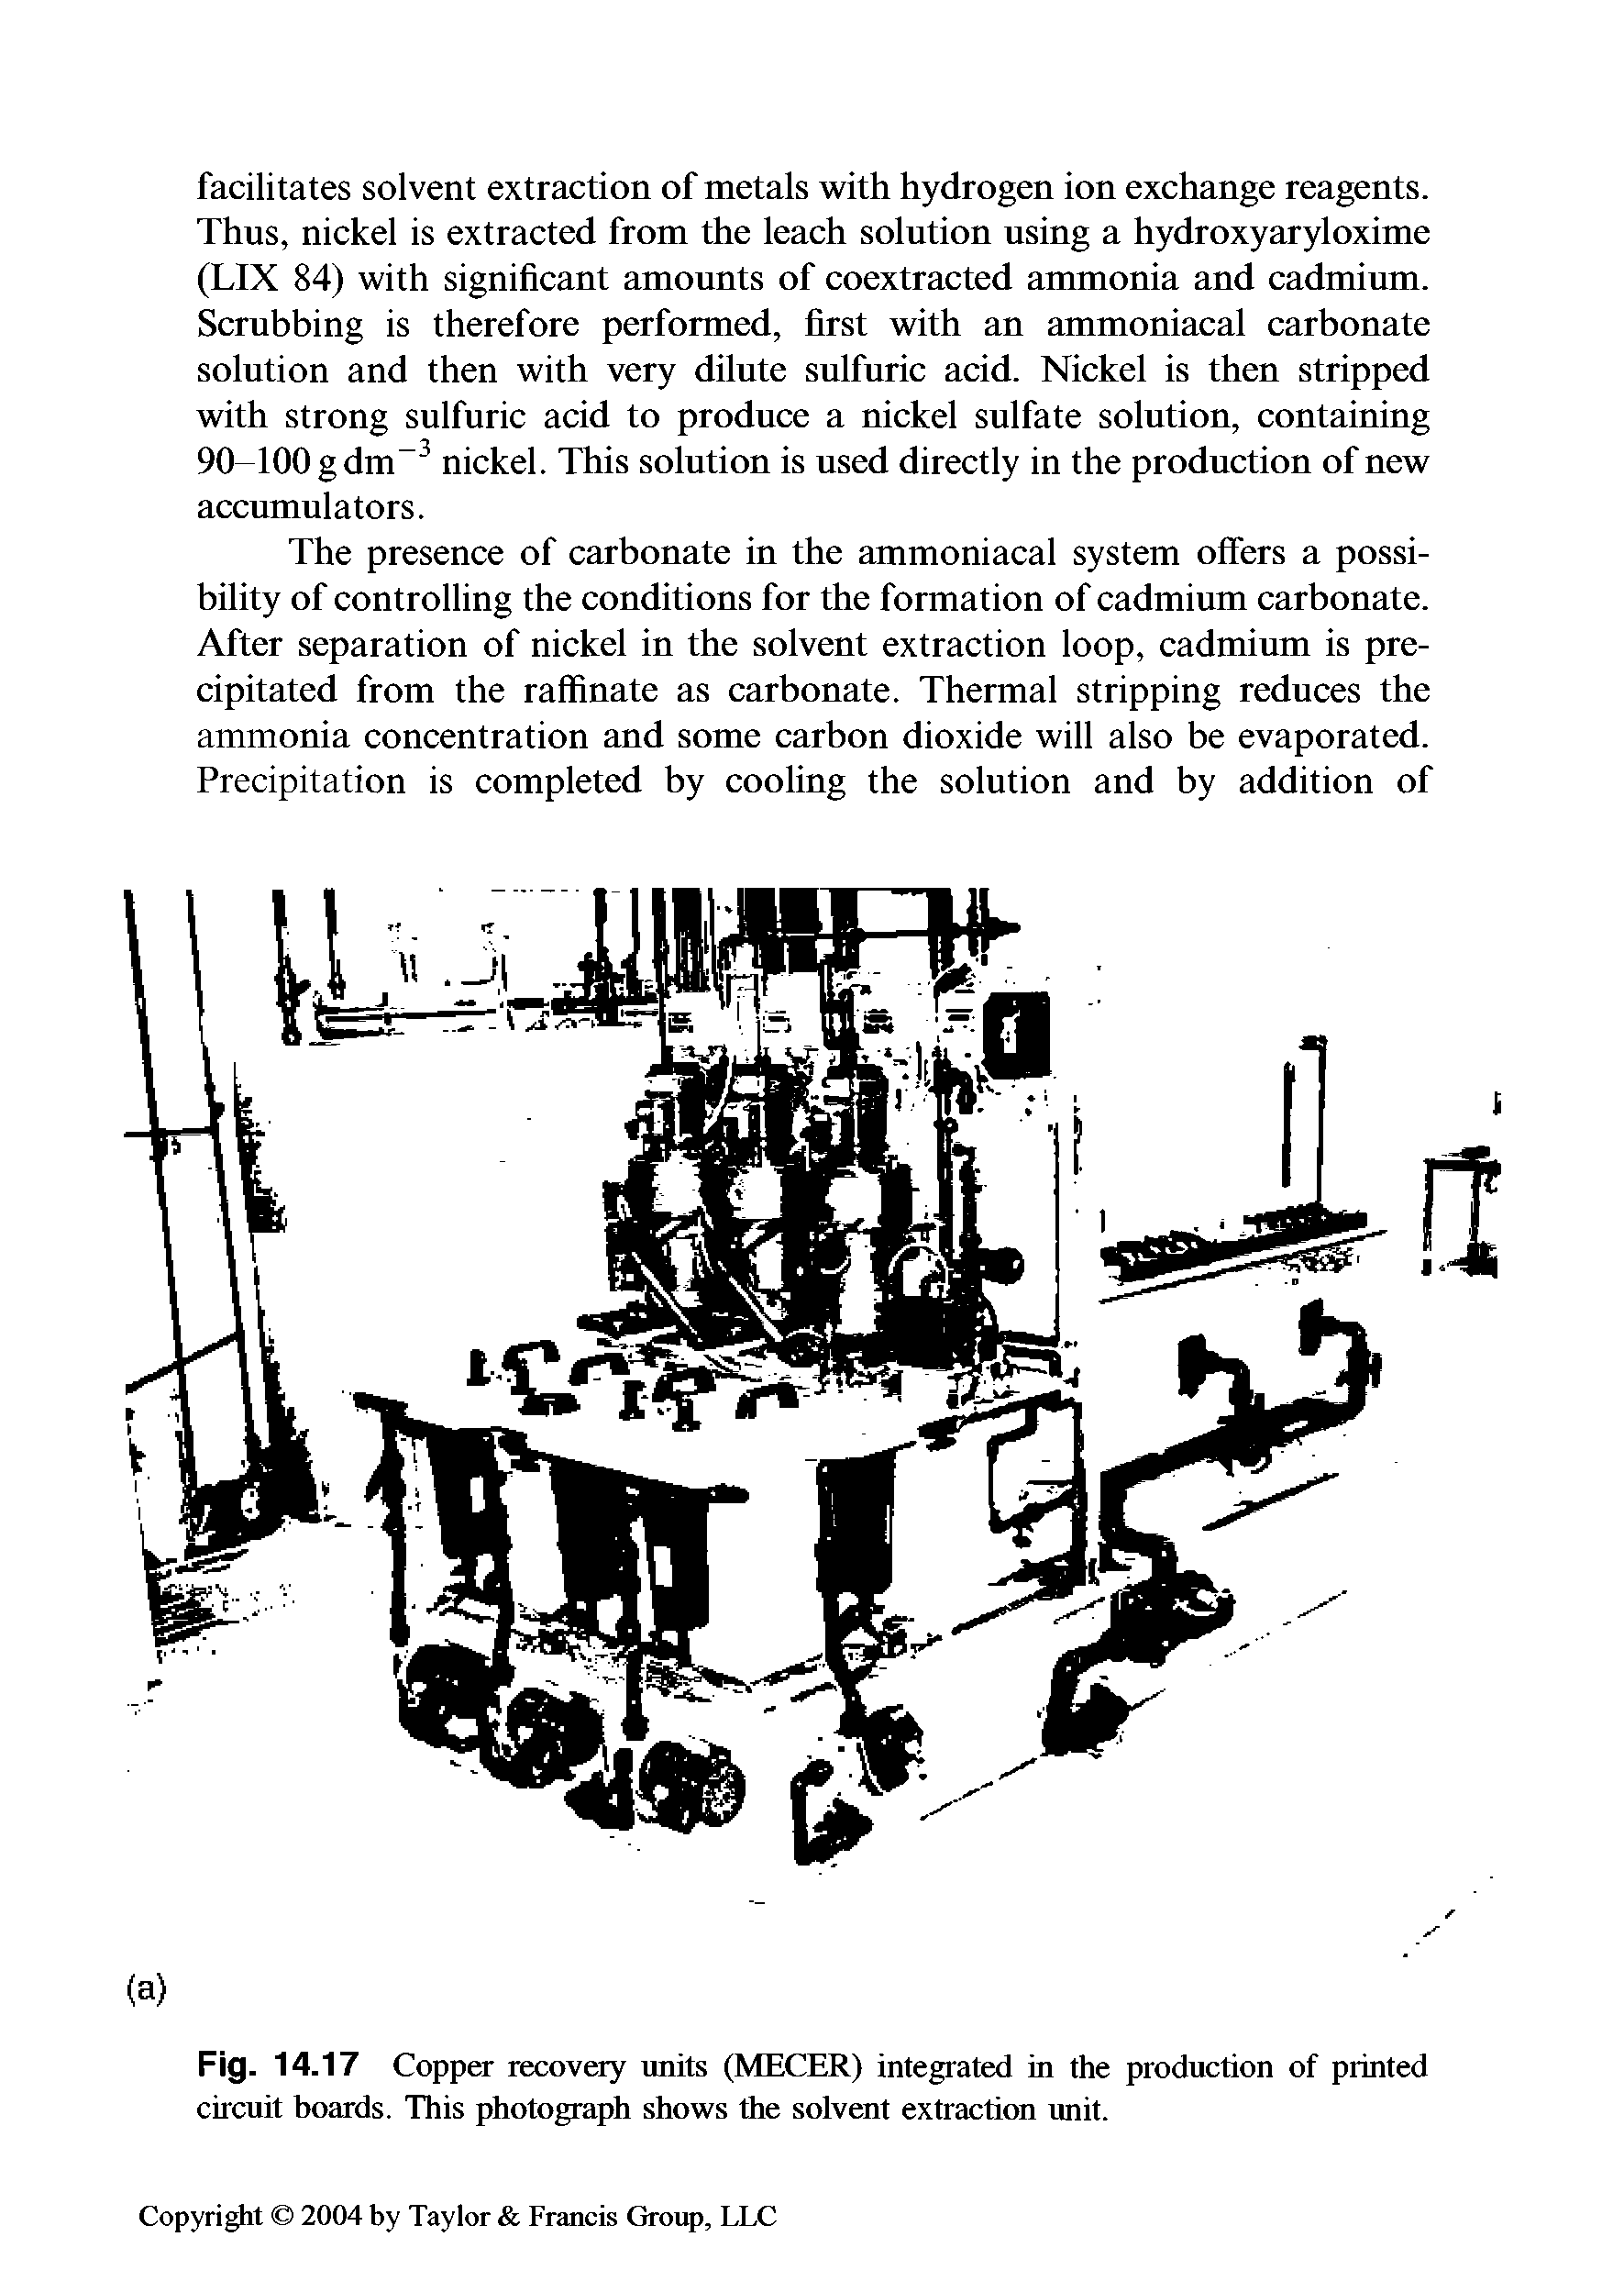 Fig. 14.17 Copper recovery units (MECER) integrated in the production of printed circuit boards. This photograph shows the solvent extraction unit.